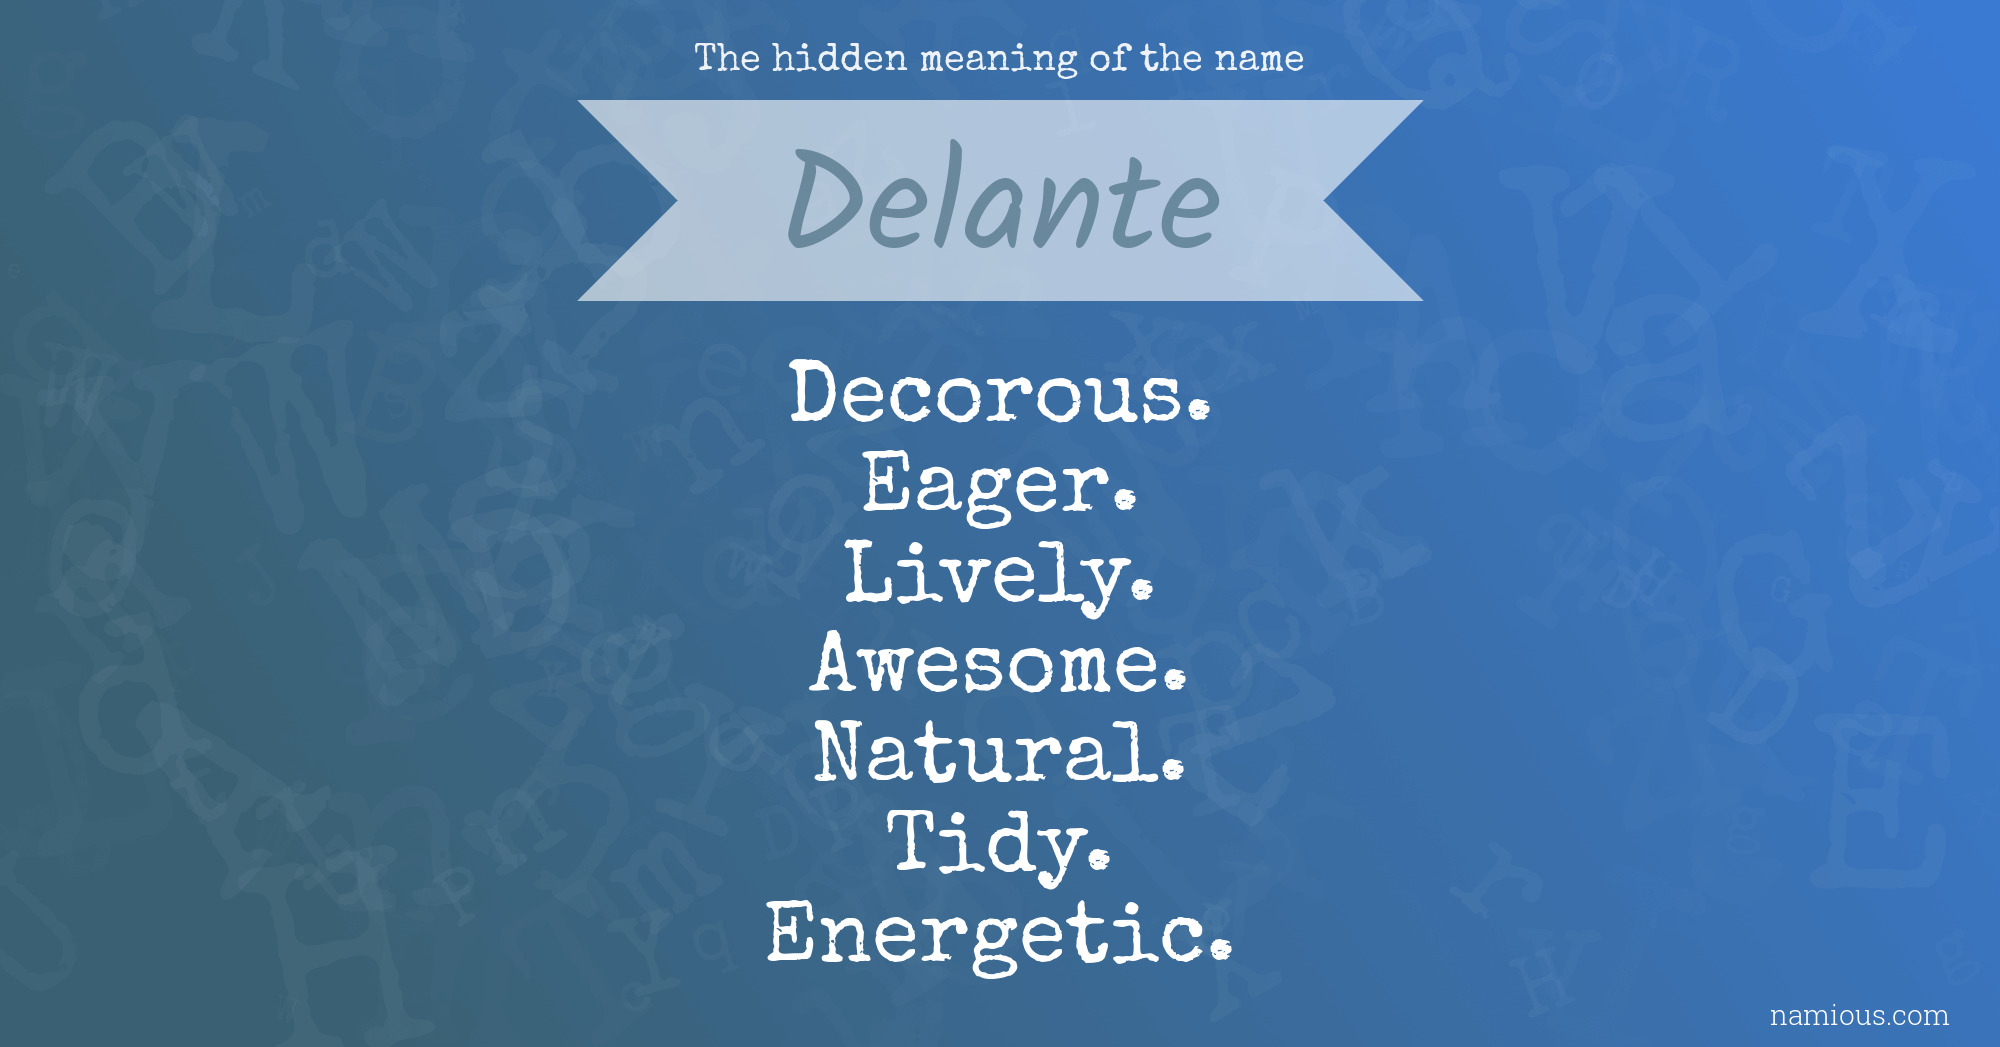 The hidden meaning of the name Delante